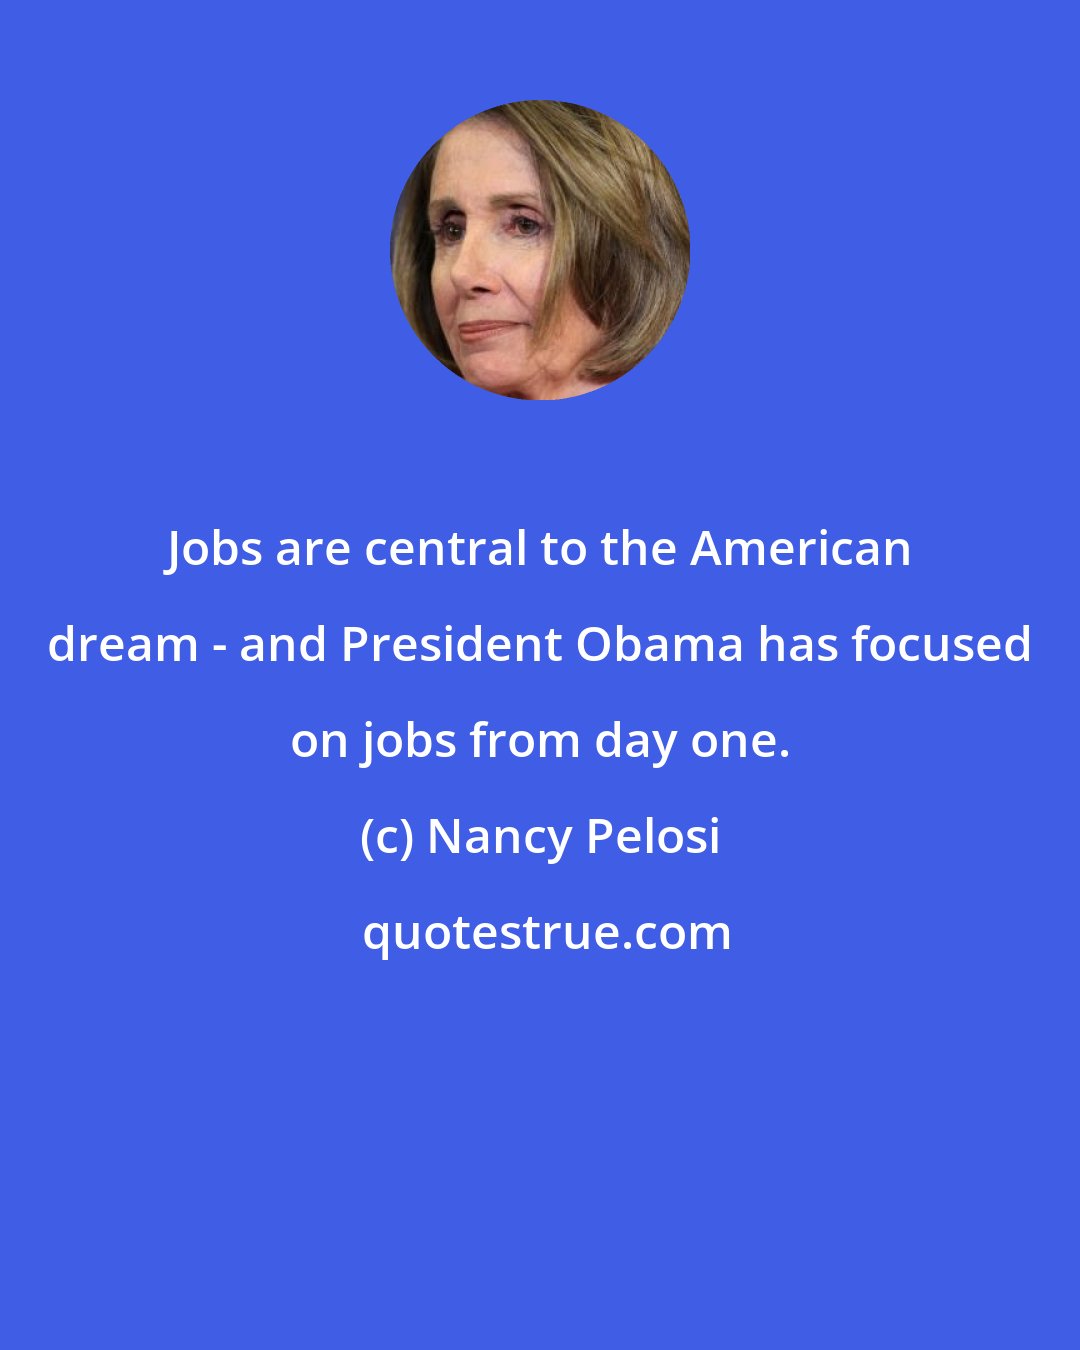 Nancy Pelosi: Jobs are central to the American dream - and President Obama has focused on jobs from day one.